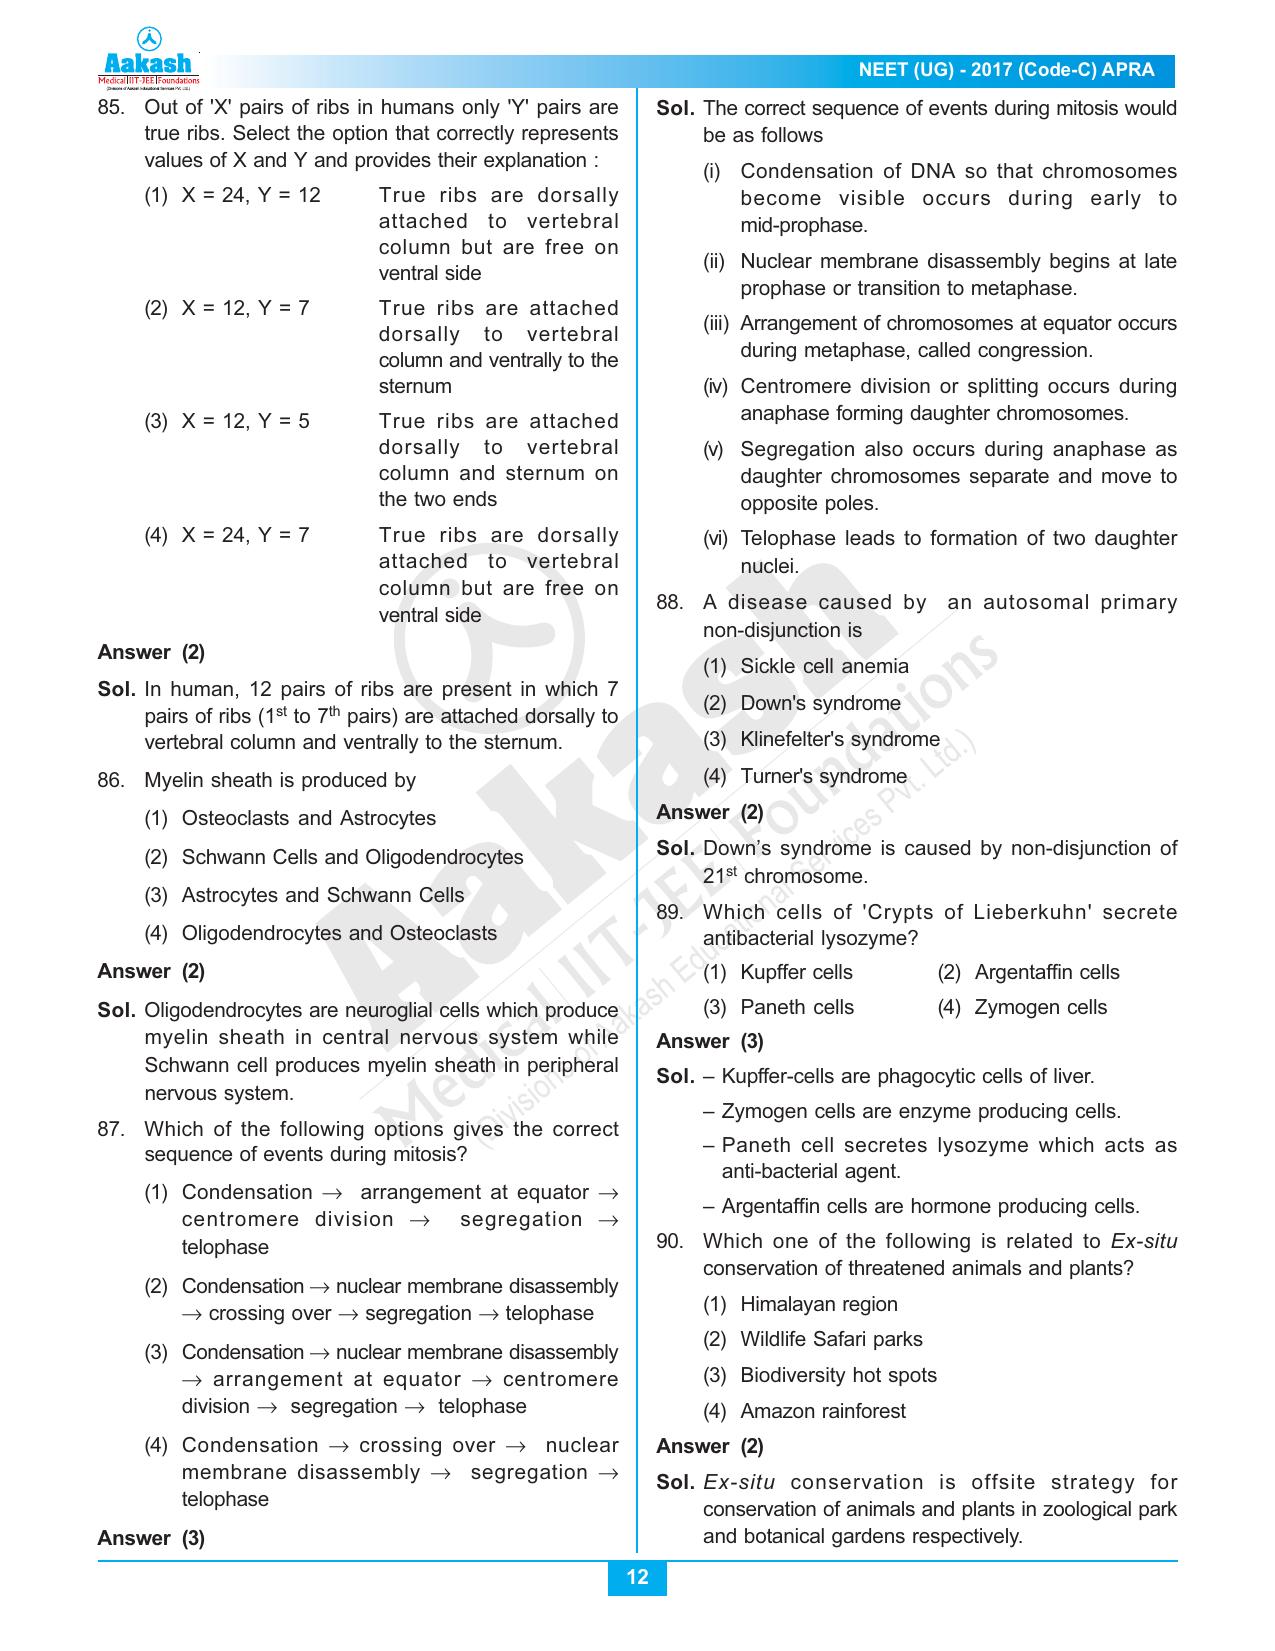  NEET Code C 2017 Answer & Solutions - Page 12